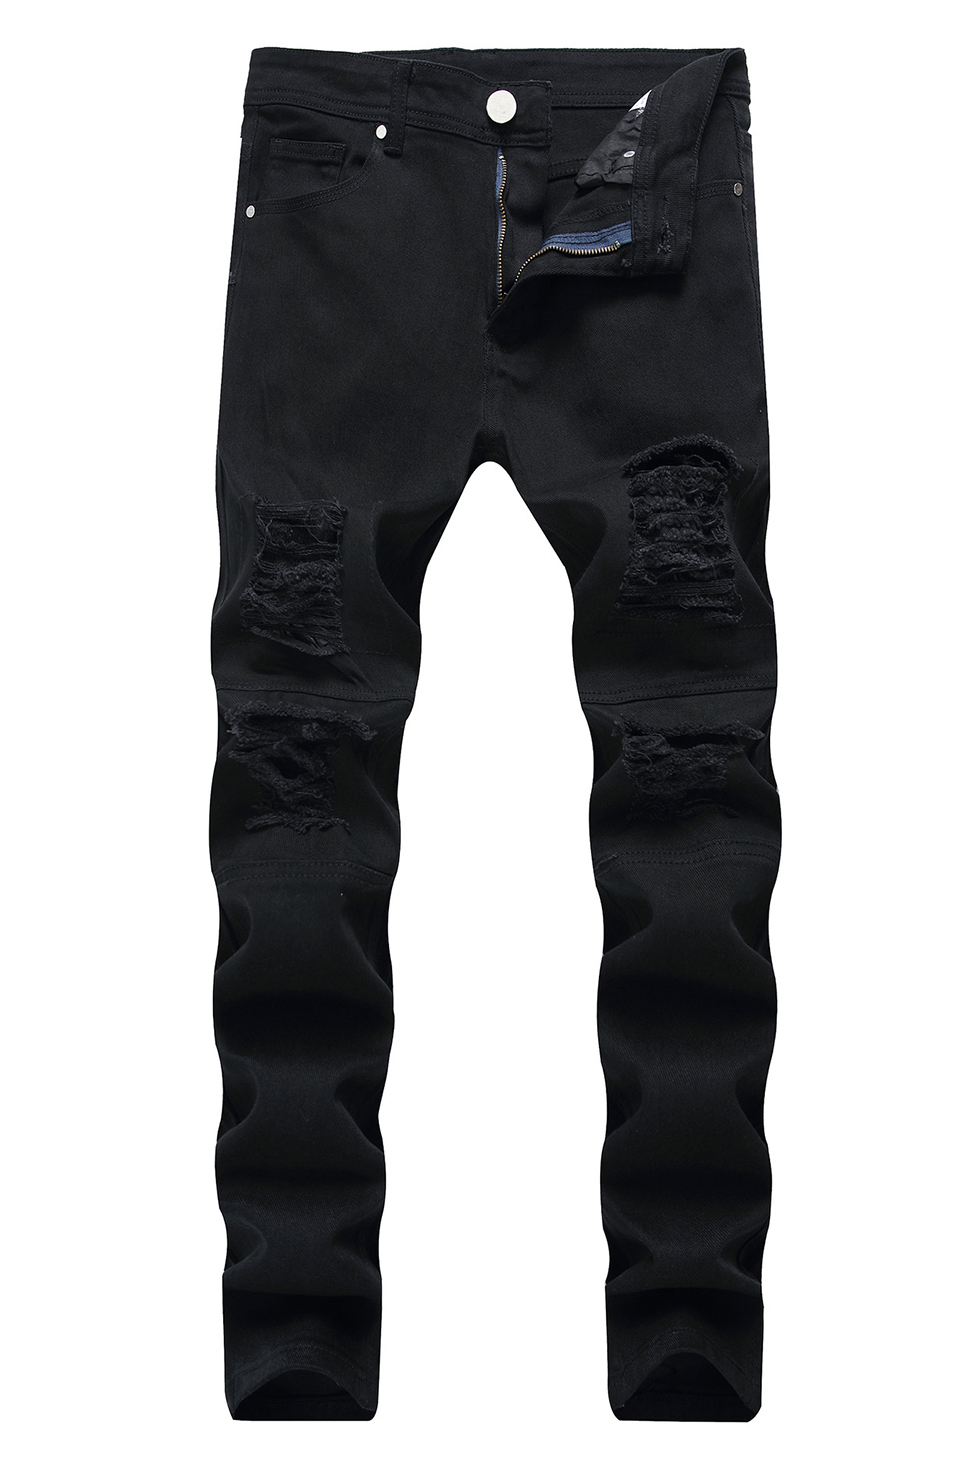 fitted black jeans mens